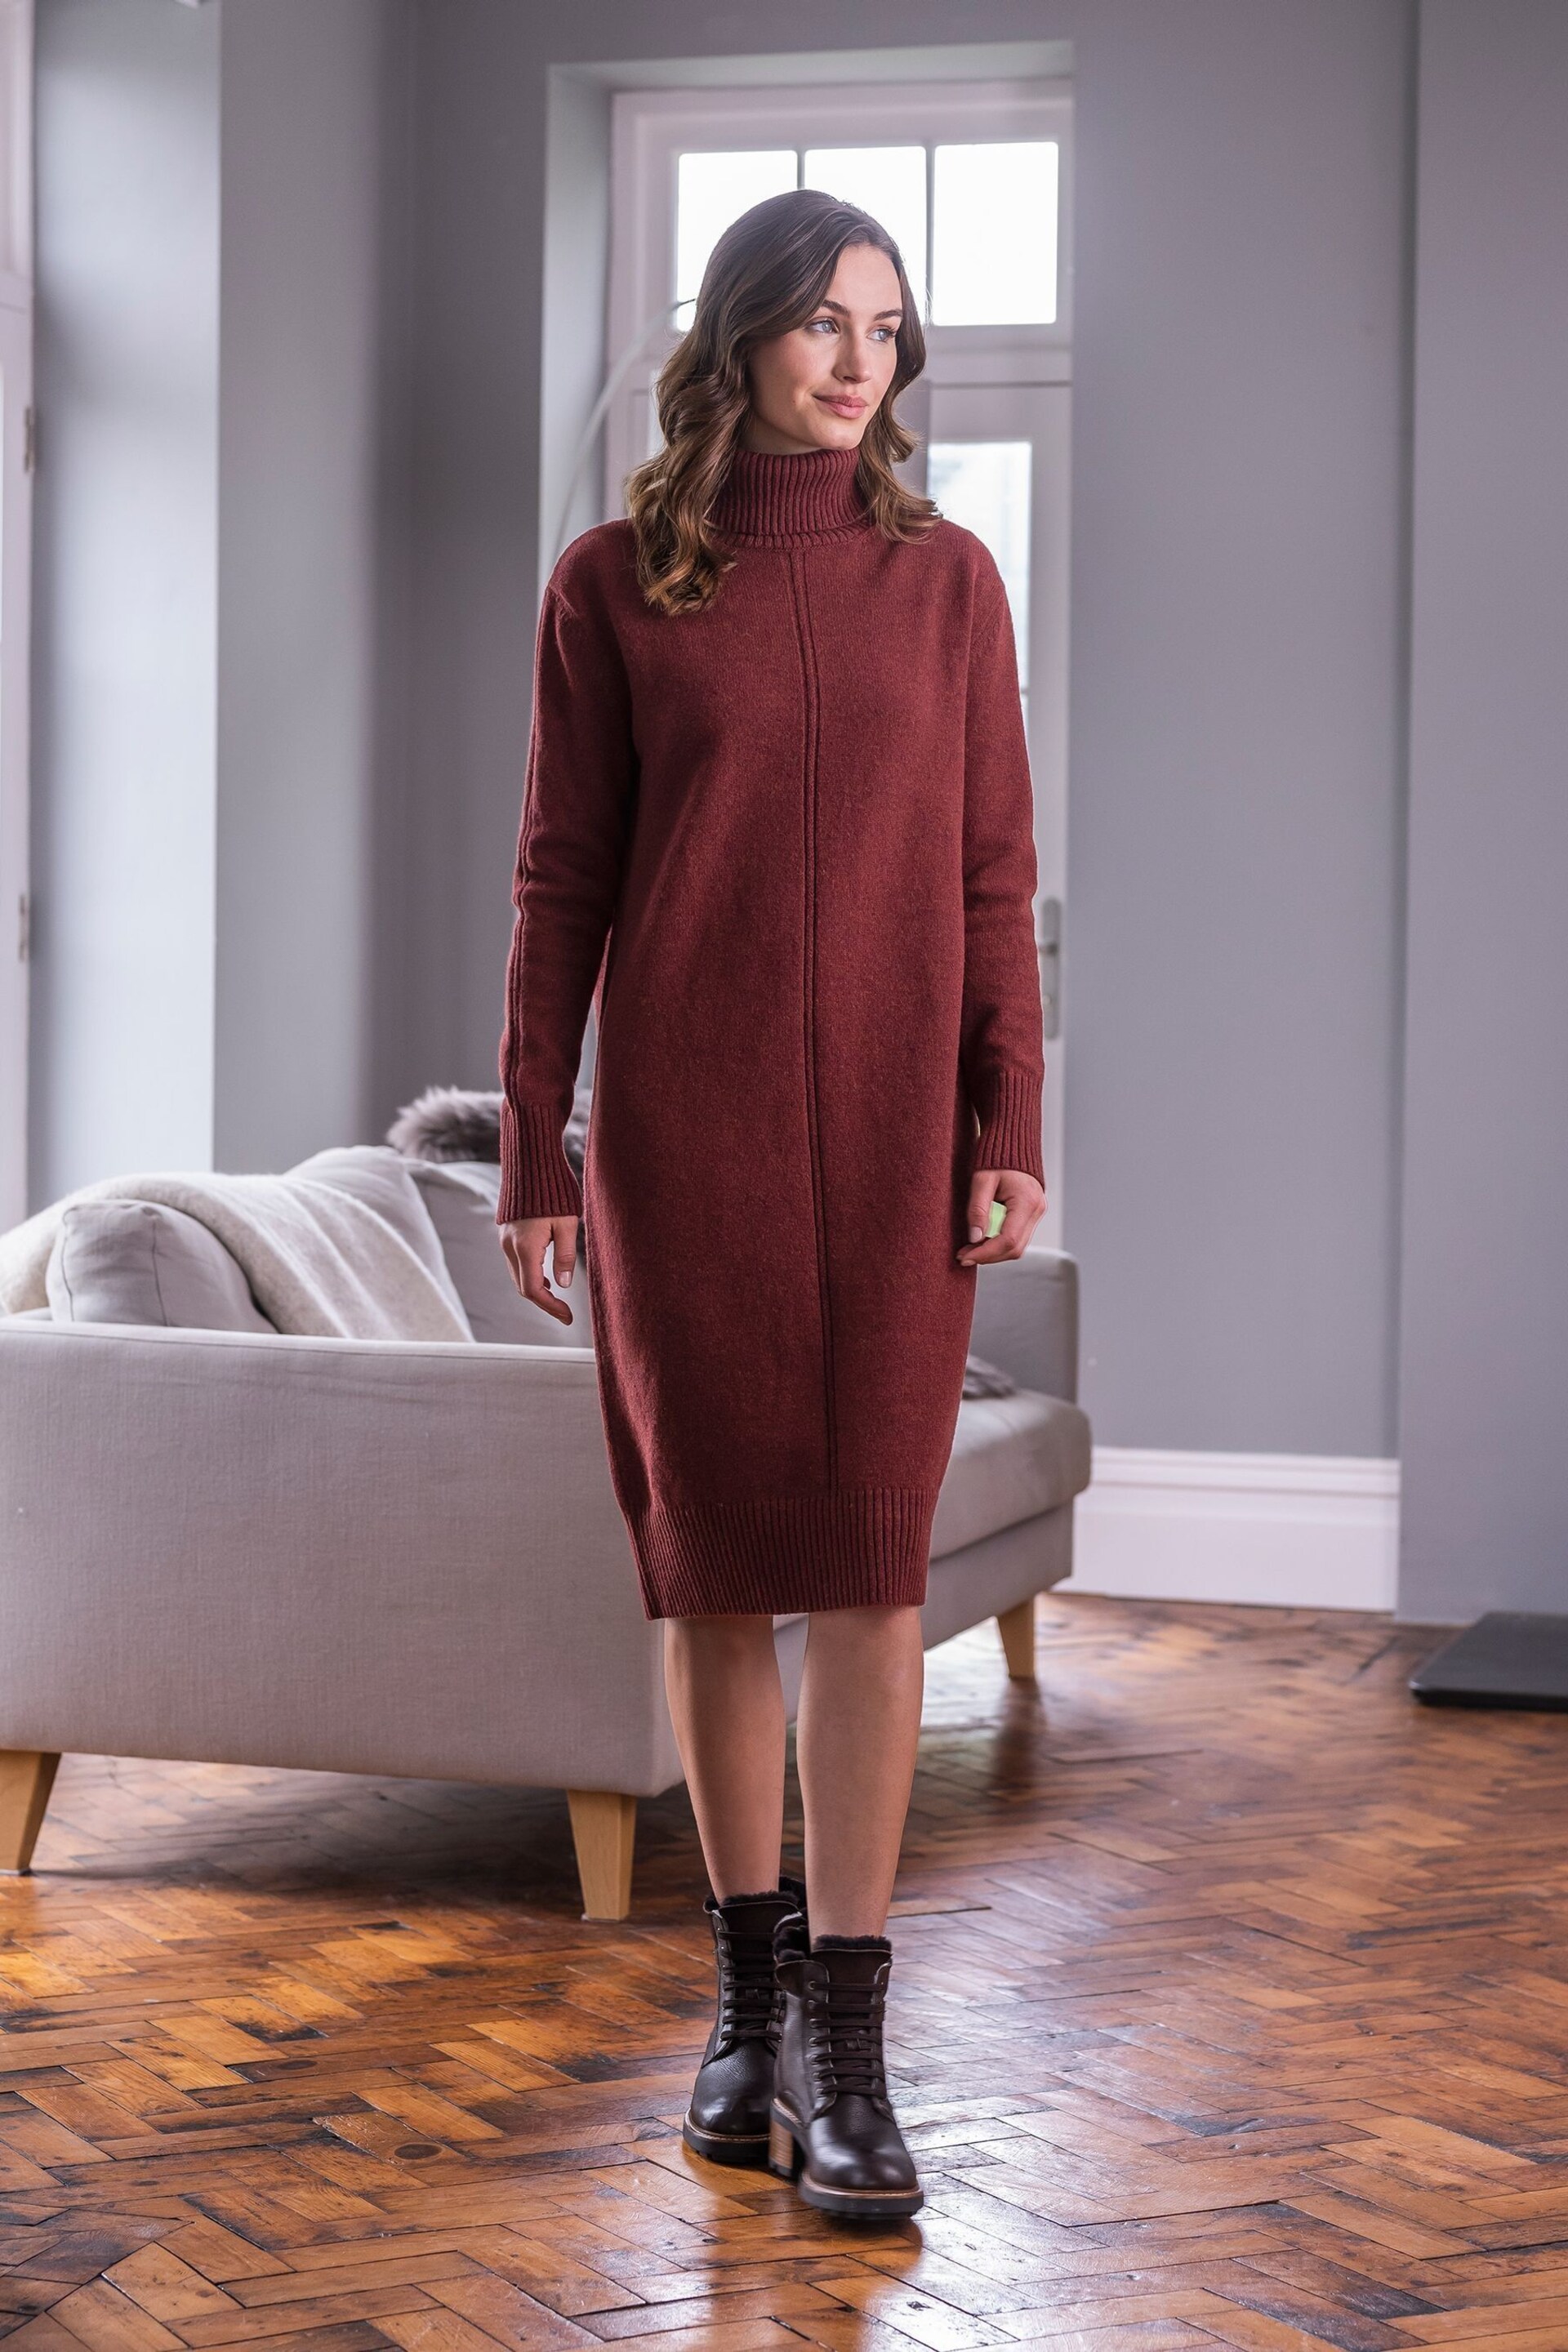 Celtic & Co. Lambswool Roll Neck Brown Dress - Image 3 of 10